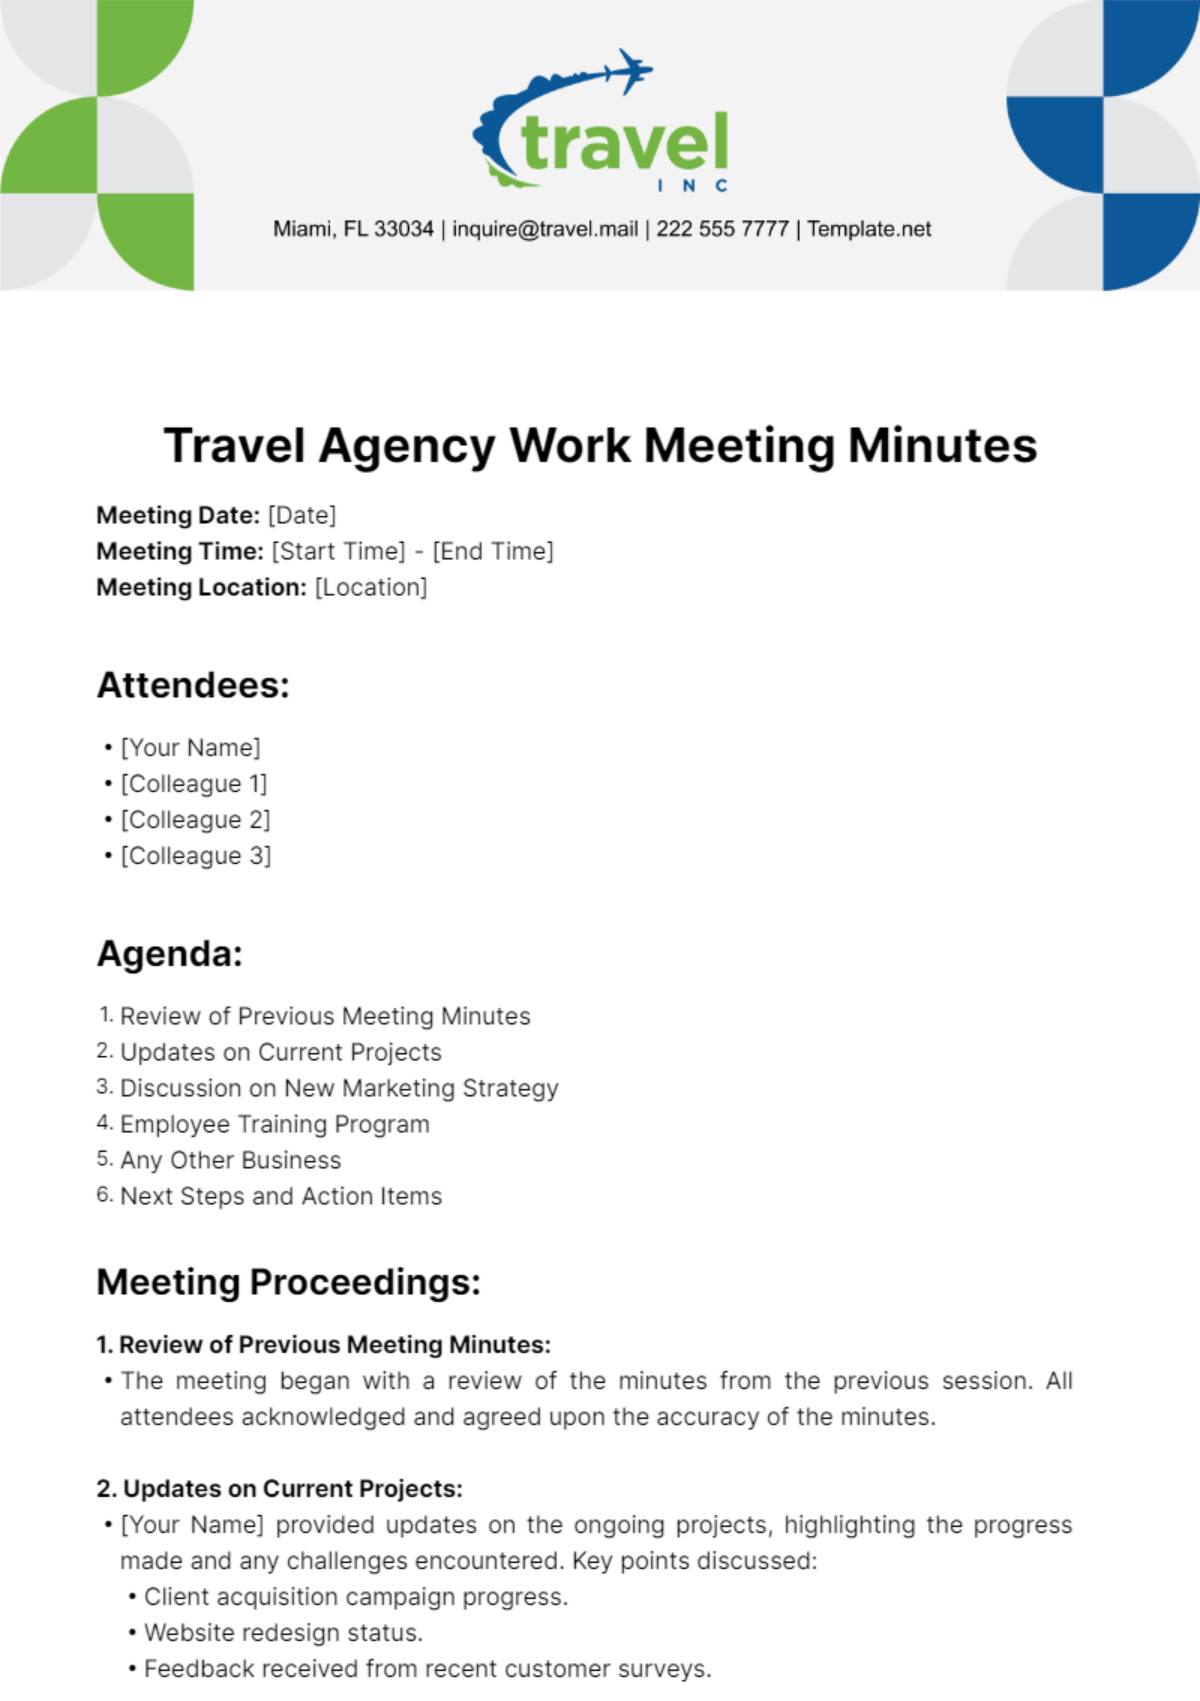 Travel Agency Work Meeting Minutes Template